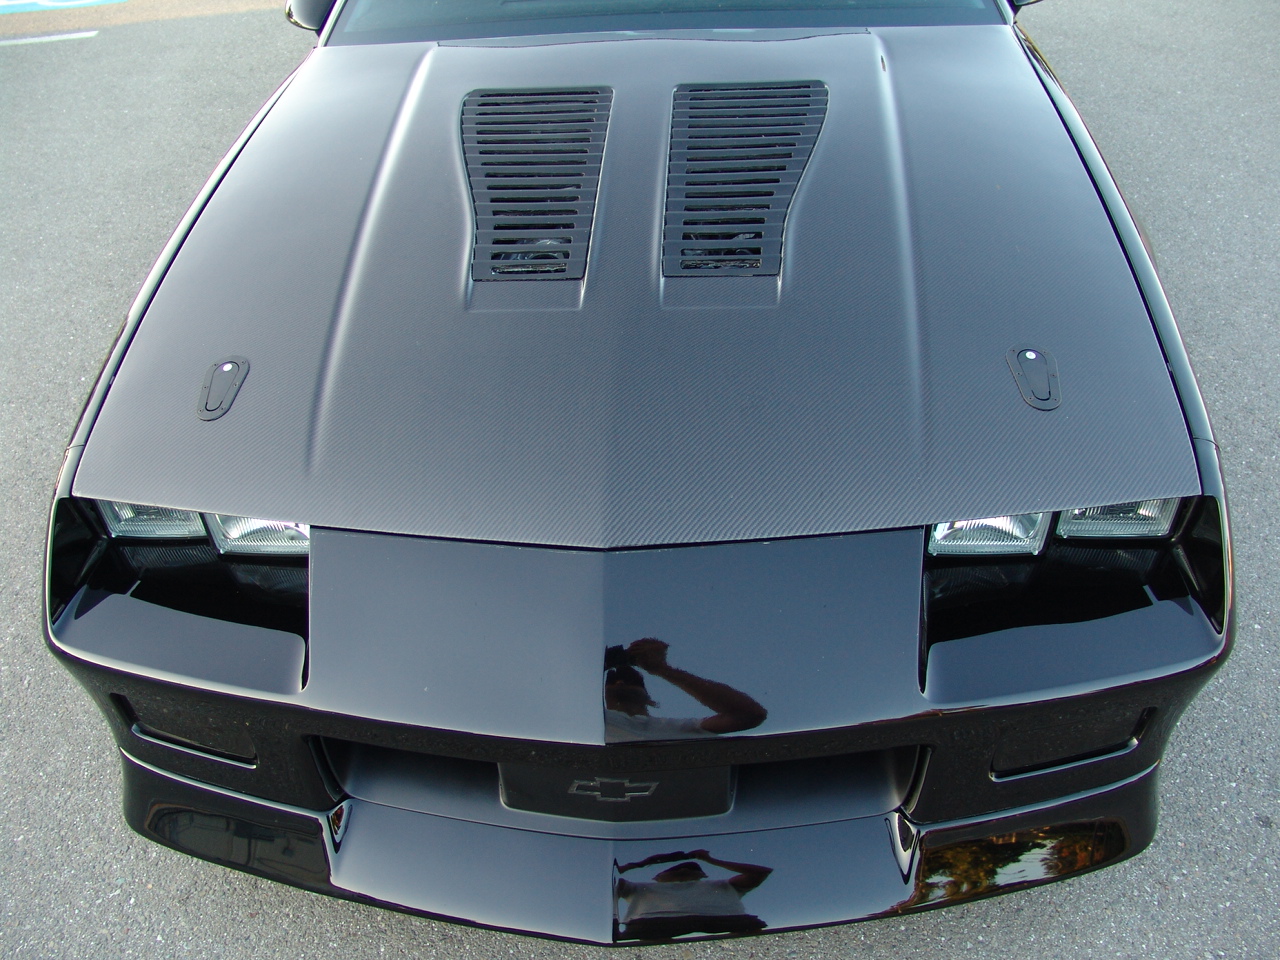 What Is The Blackest Of Black Paint? - Page 3 - LS1TECH - Camaro and  Firebird Forum Discussion